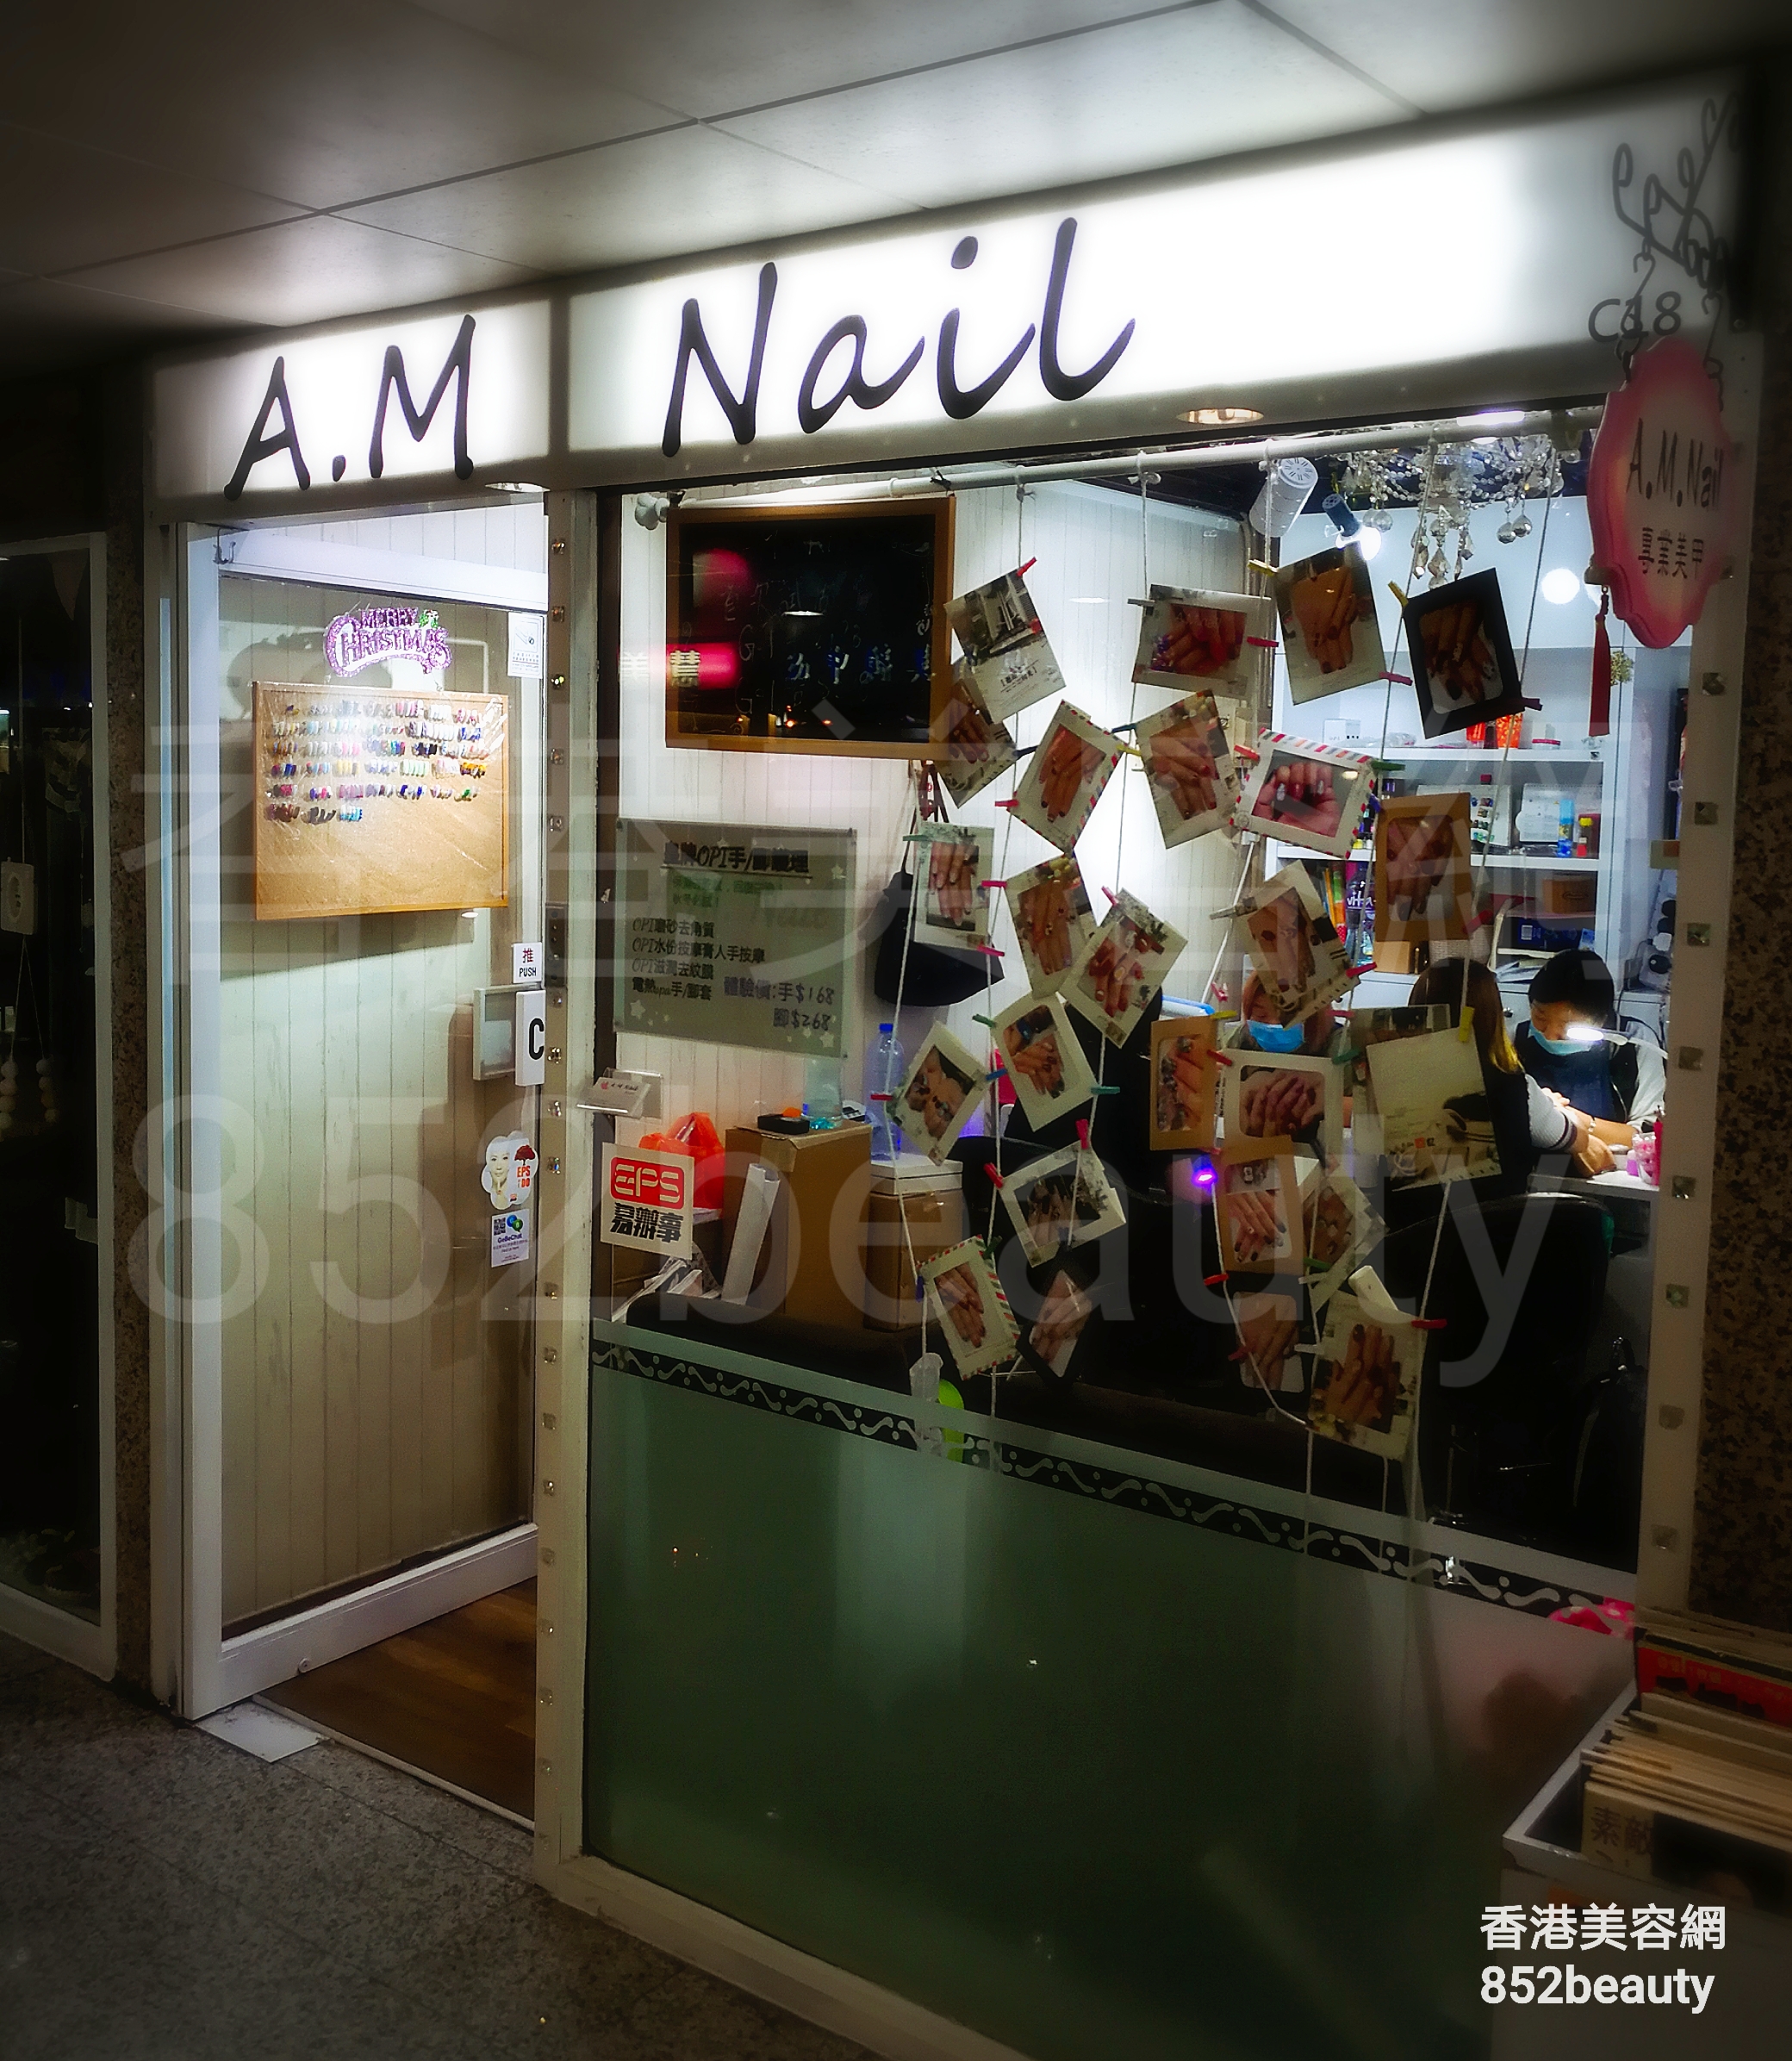 Hand and foot care: A.M. Nail